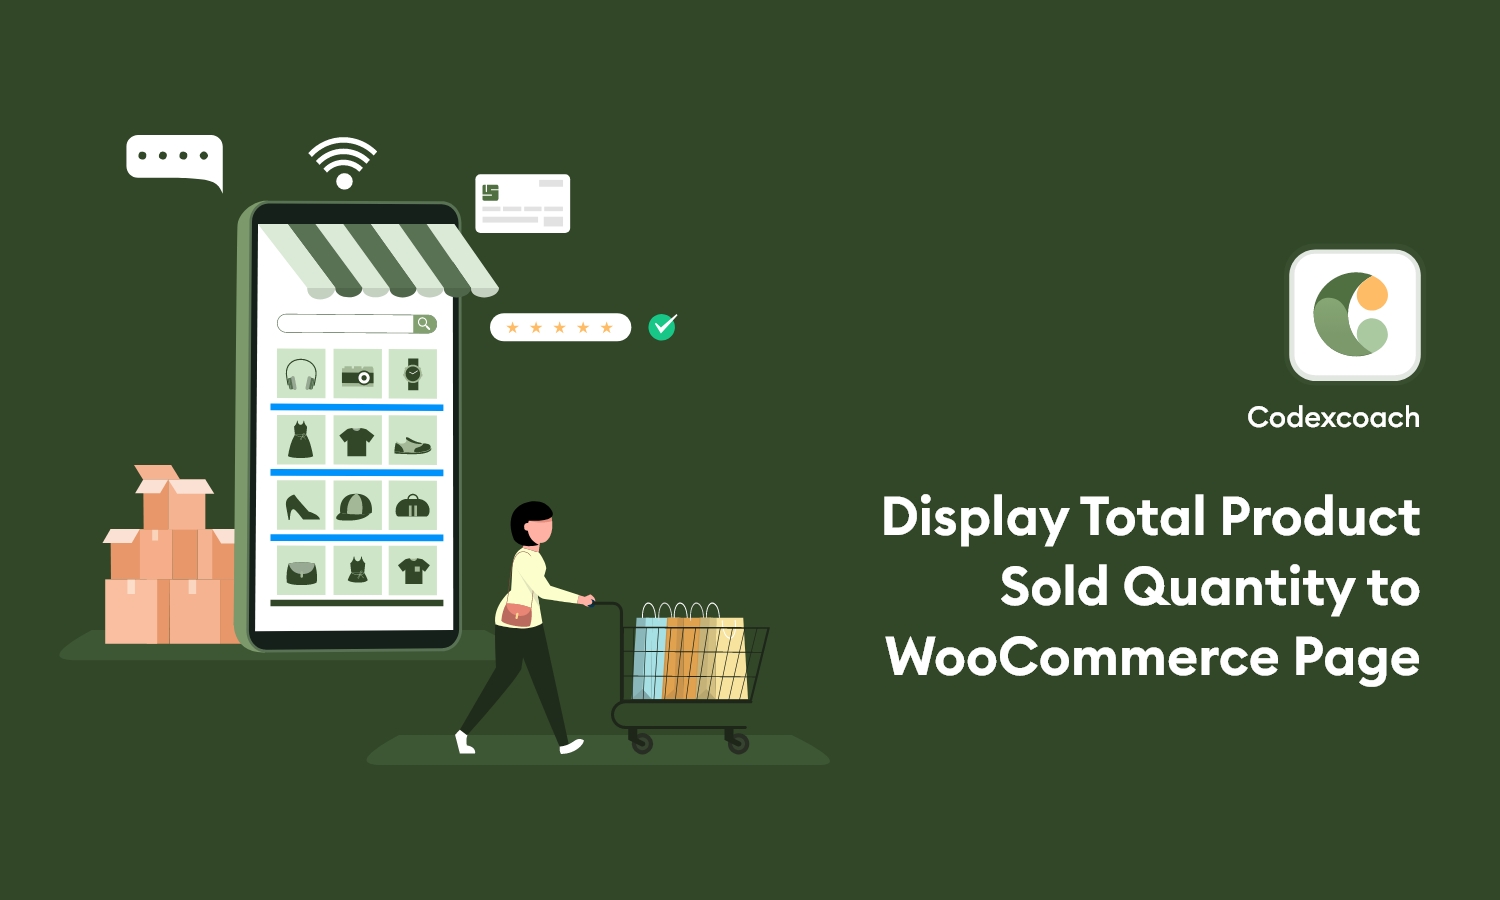 Display Total Product Sold Quantity to WooCommerce Page